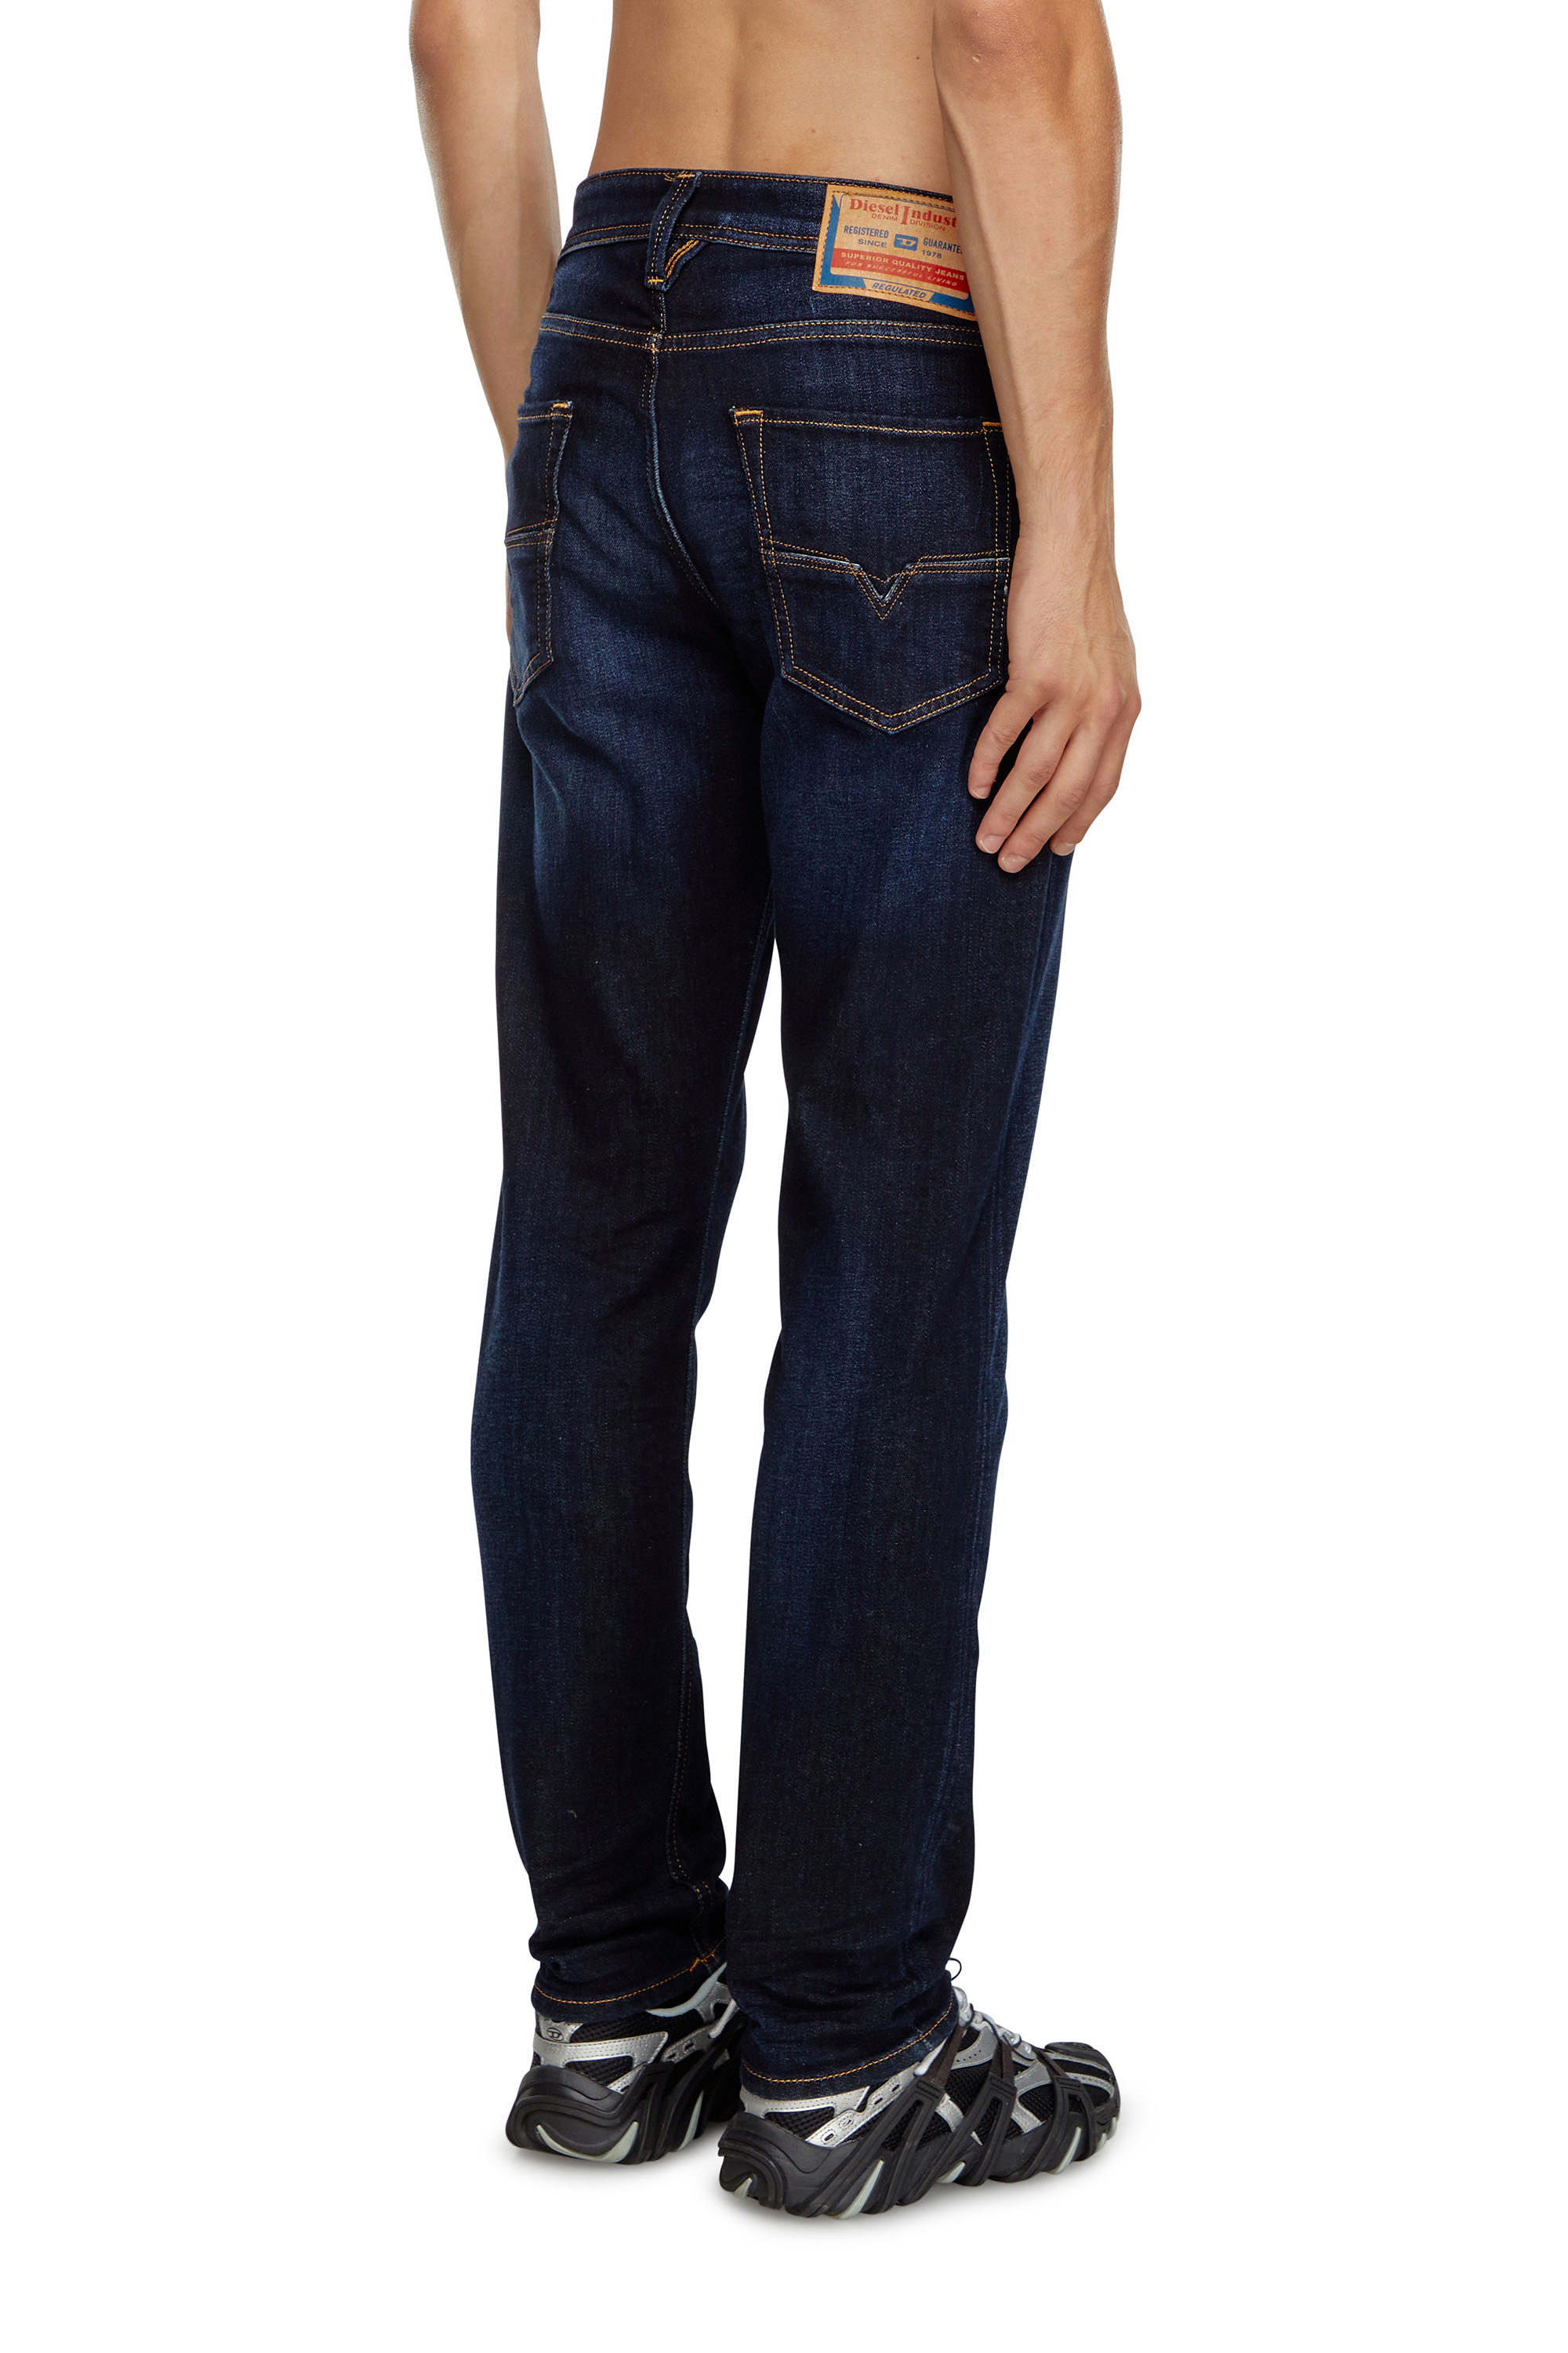 Diesel - Tapered Jeans 1986 Larkee-Beex 009ZS, Hombre Tapered Jeans - 1986 Larkee-Beex in Azul marino - Image 4